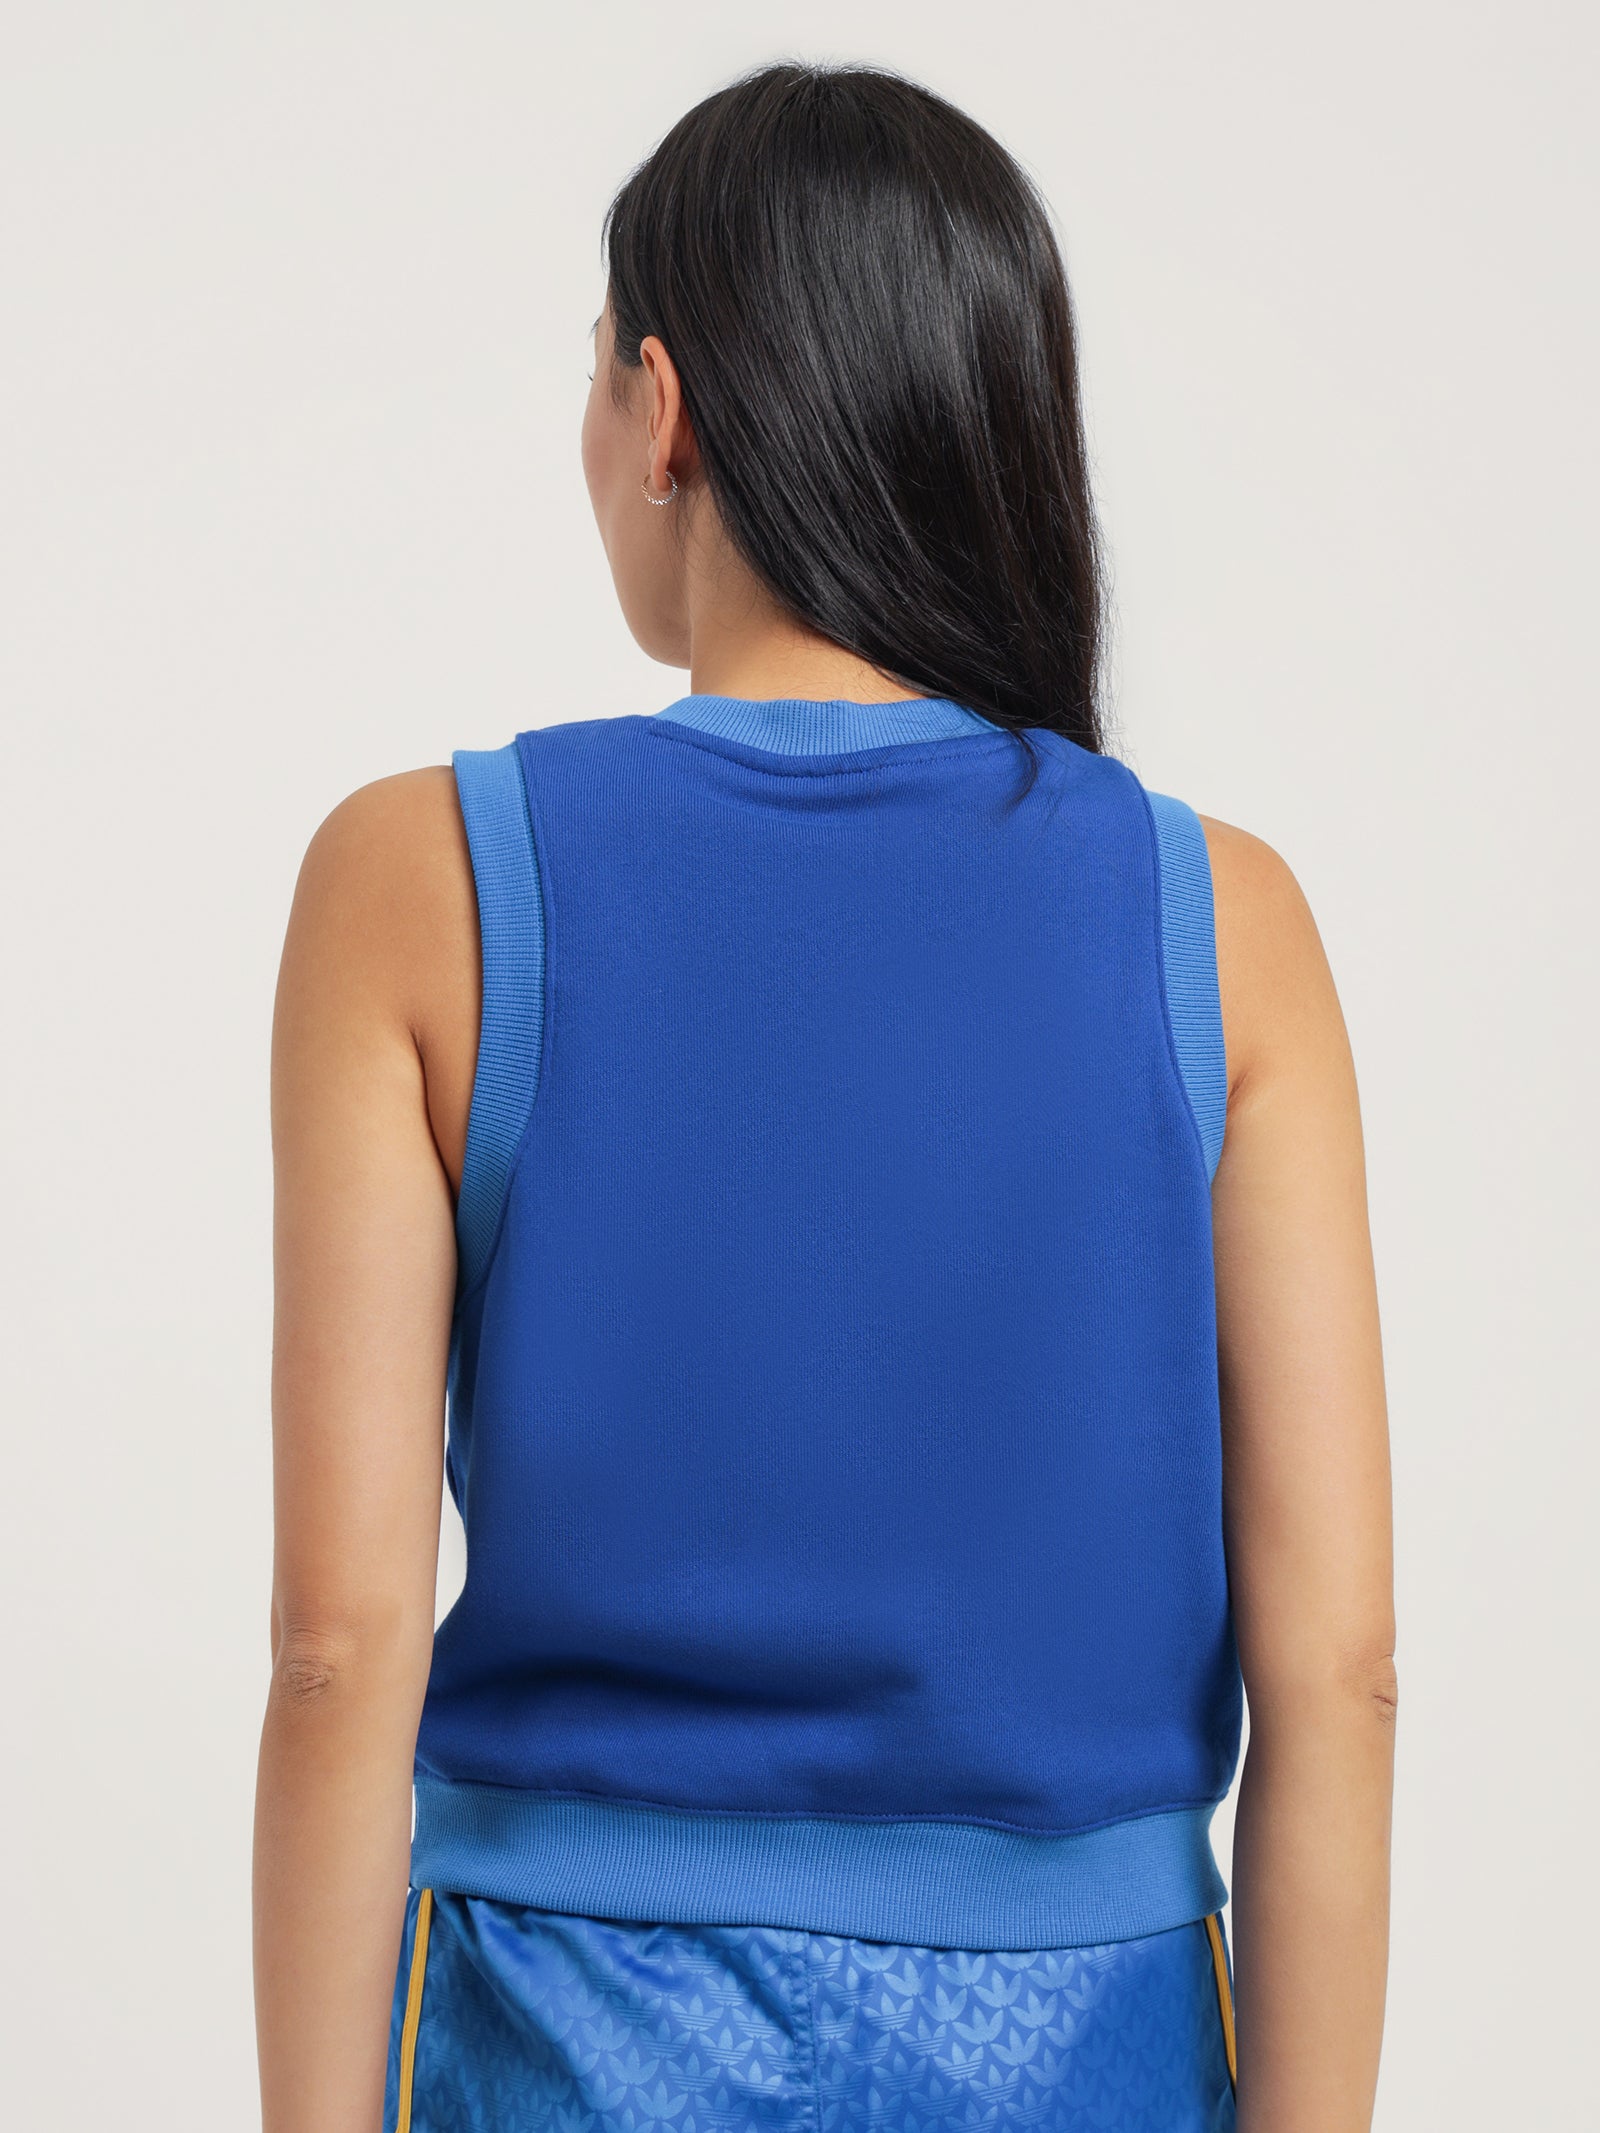 ADICOLOR 70s Heritage Now Sweater Vest in Royal Blue